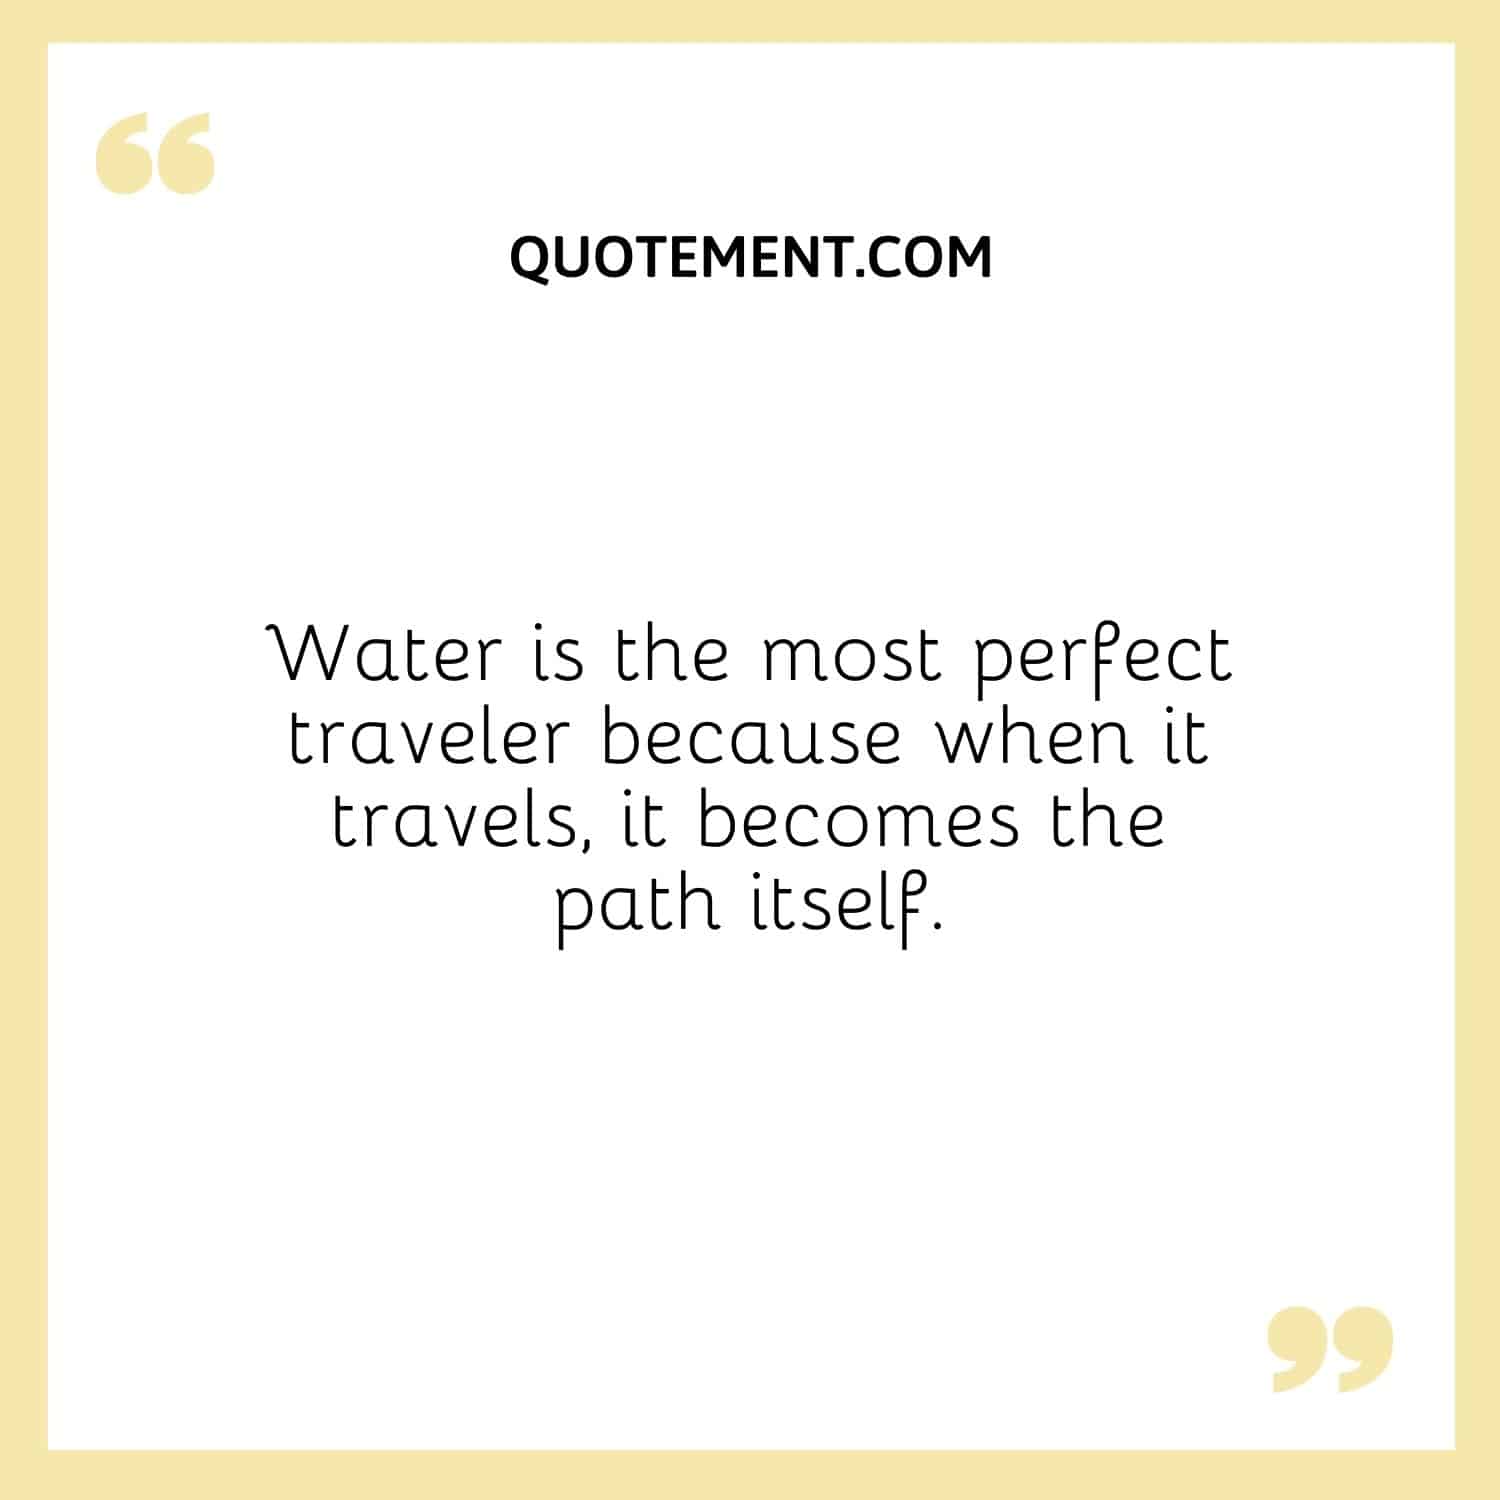 Water is the most perfect traveler because when it travels, it becomes the path itself.